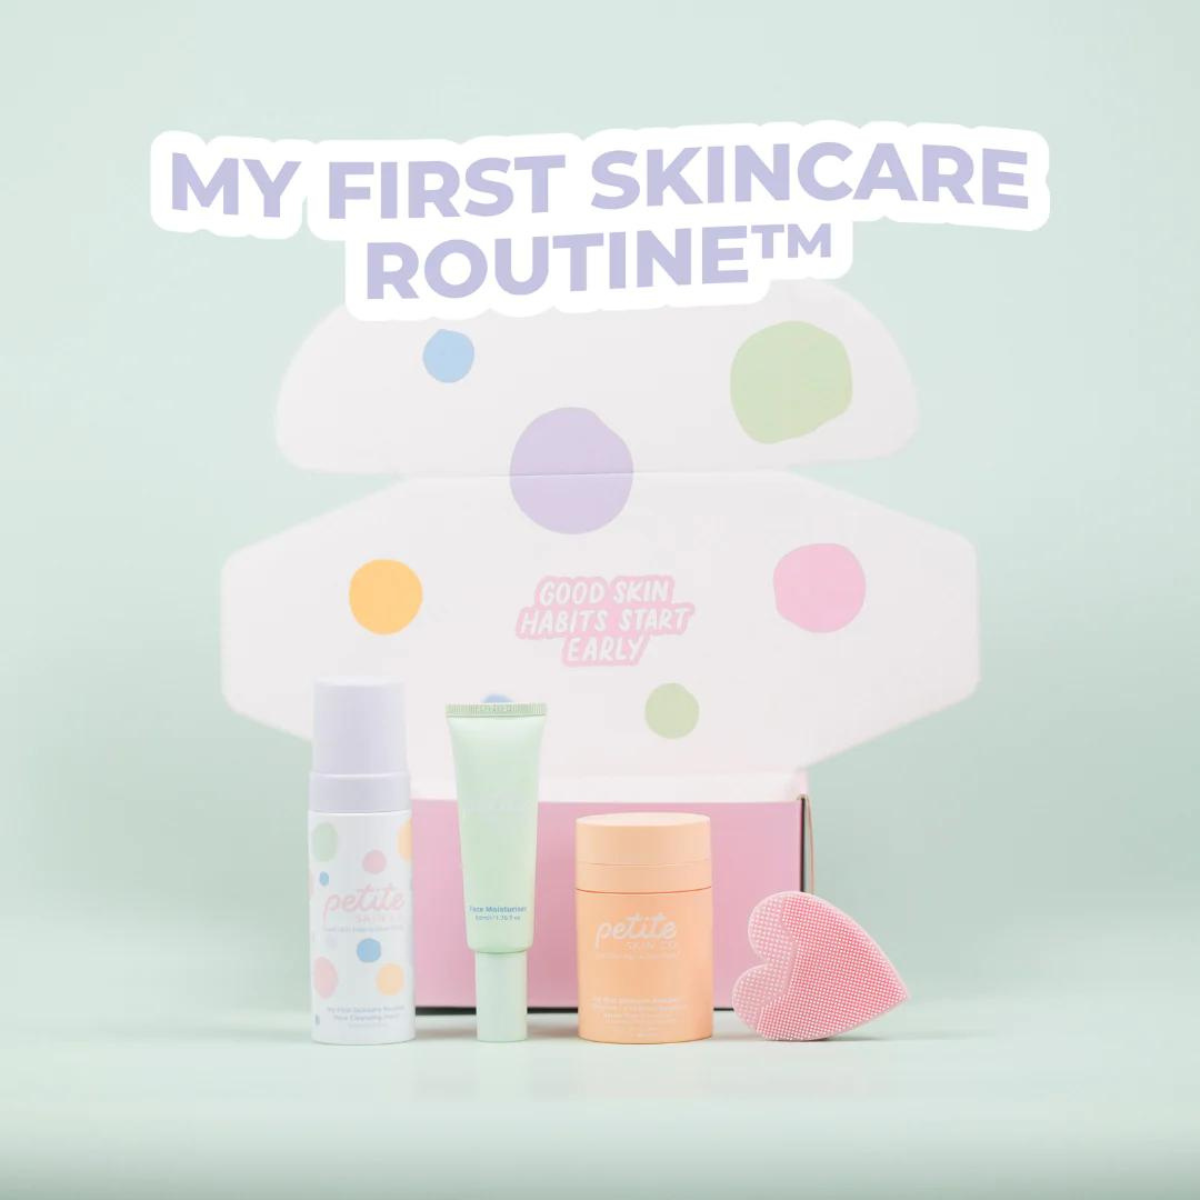 Petite Skin Co My First Skincare Routine Kit - Confetti Collection